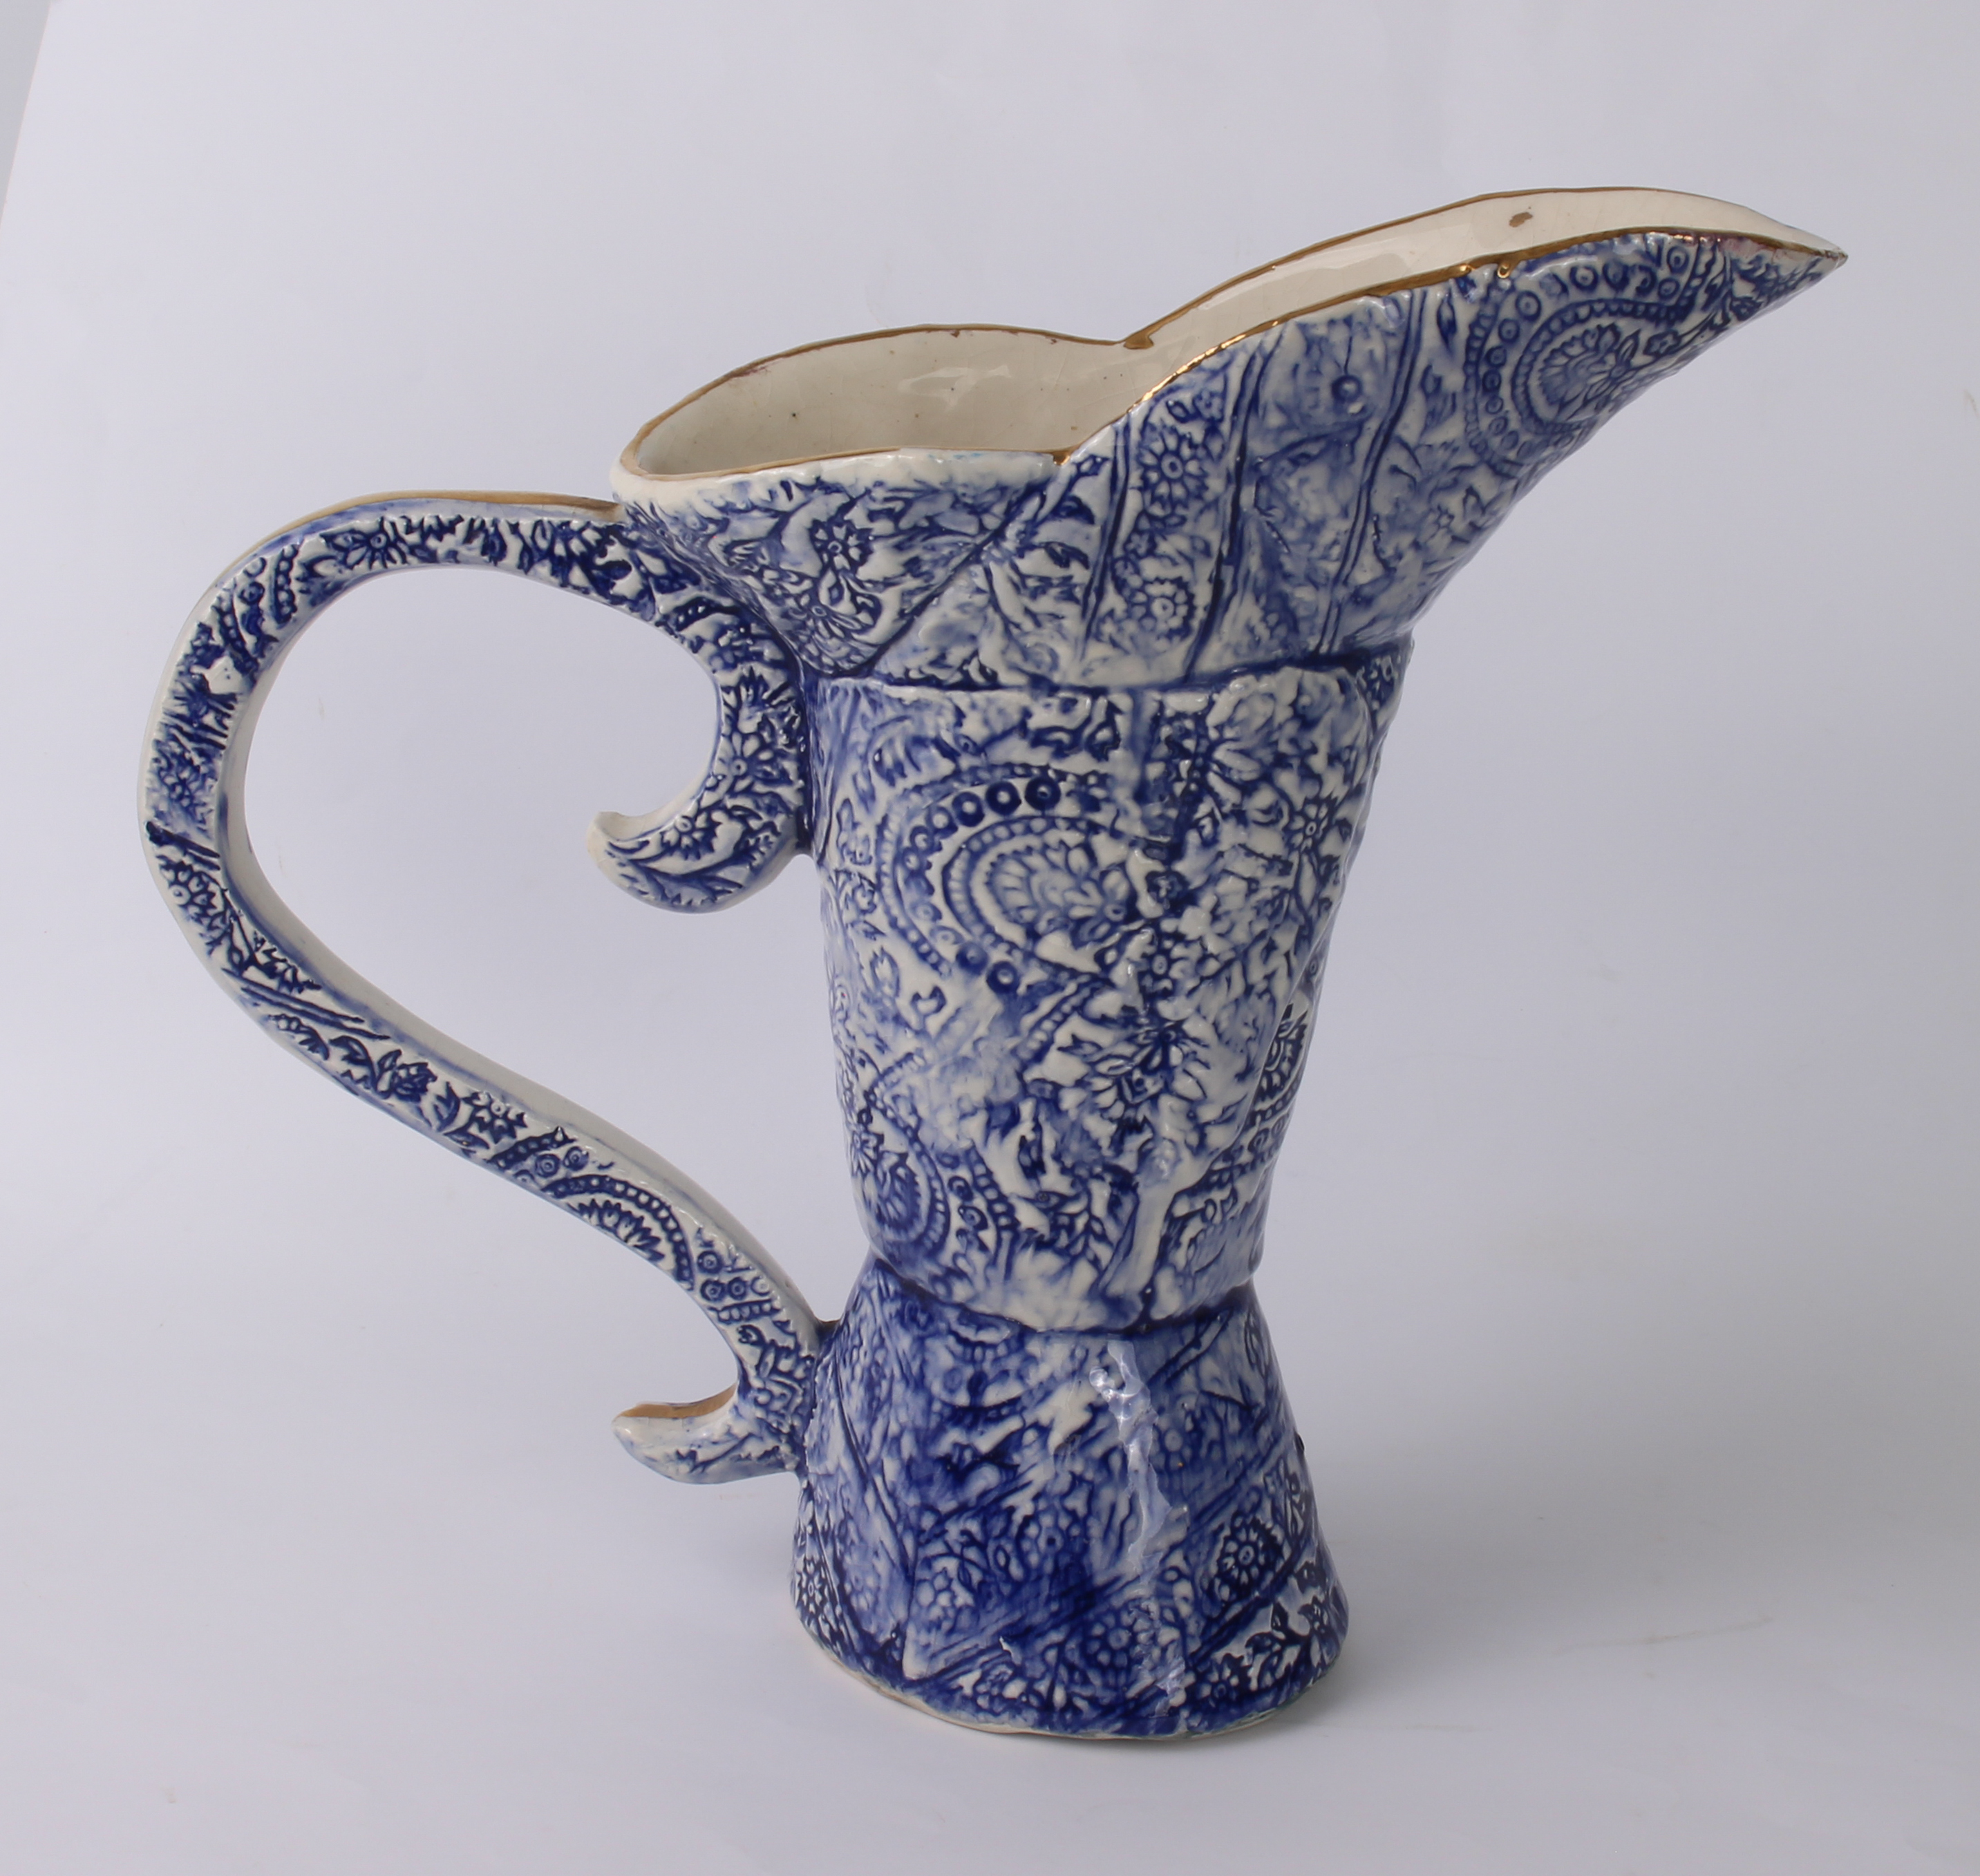 An unusual Continental blue and white pottery ewer - with three-part boot-shaped body and S-scroll